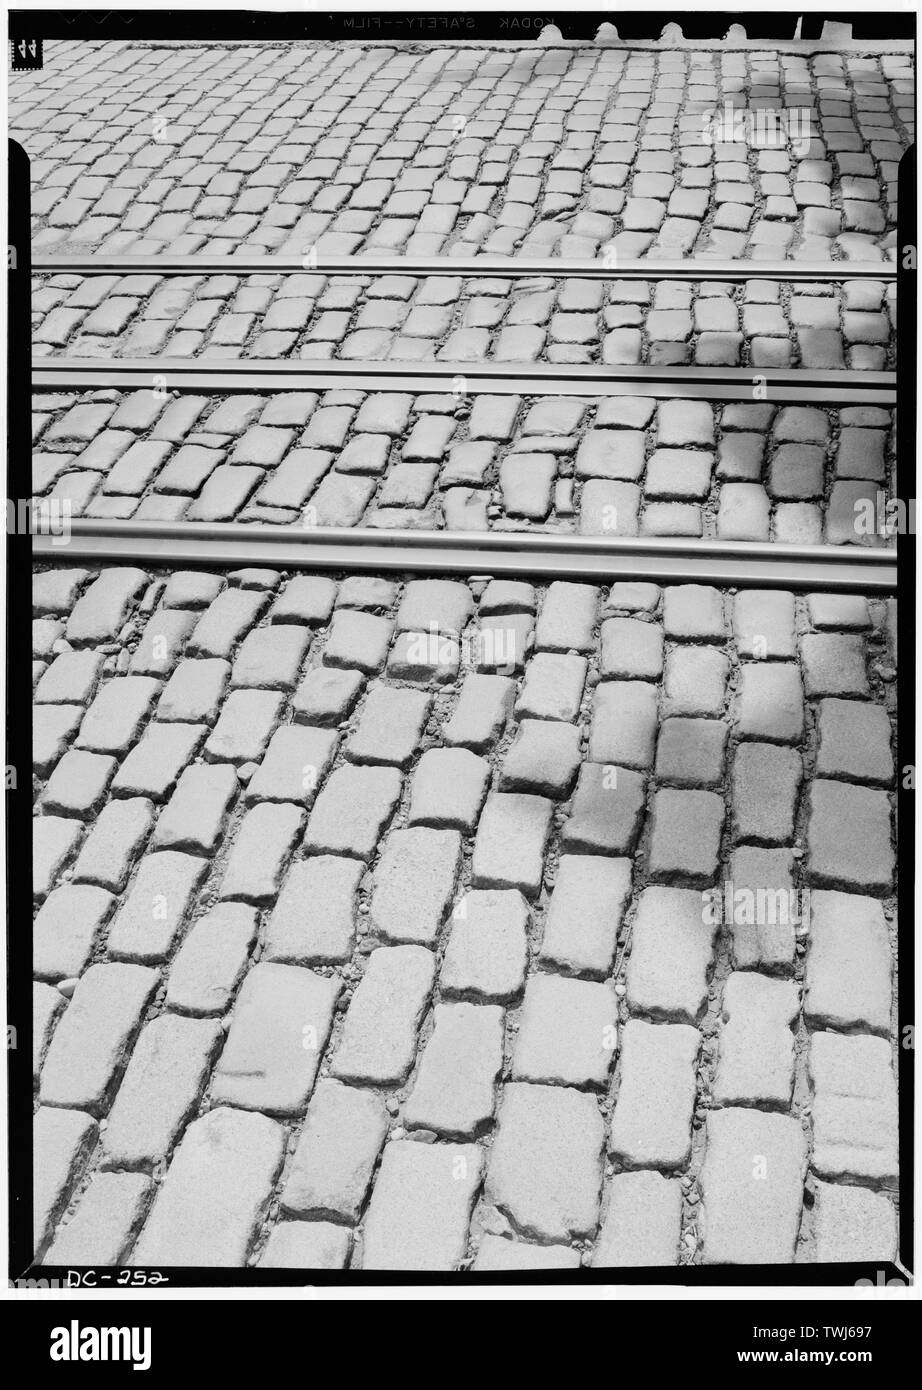 September 1969 STREETCAR RAILS, O AND POTOMAC STREETS, N.W. - Georgetown Street Furniture, Georgetown Vicinity, Washington, District of Columbia, DC Stock Photo